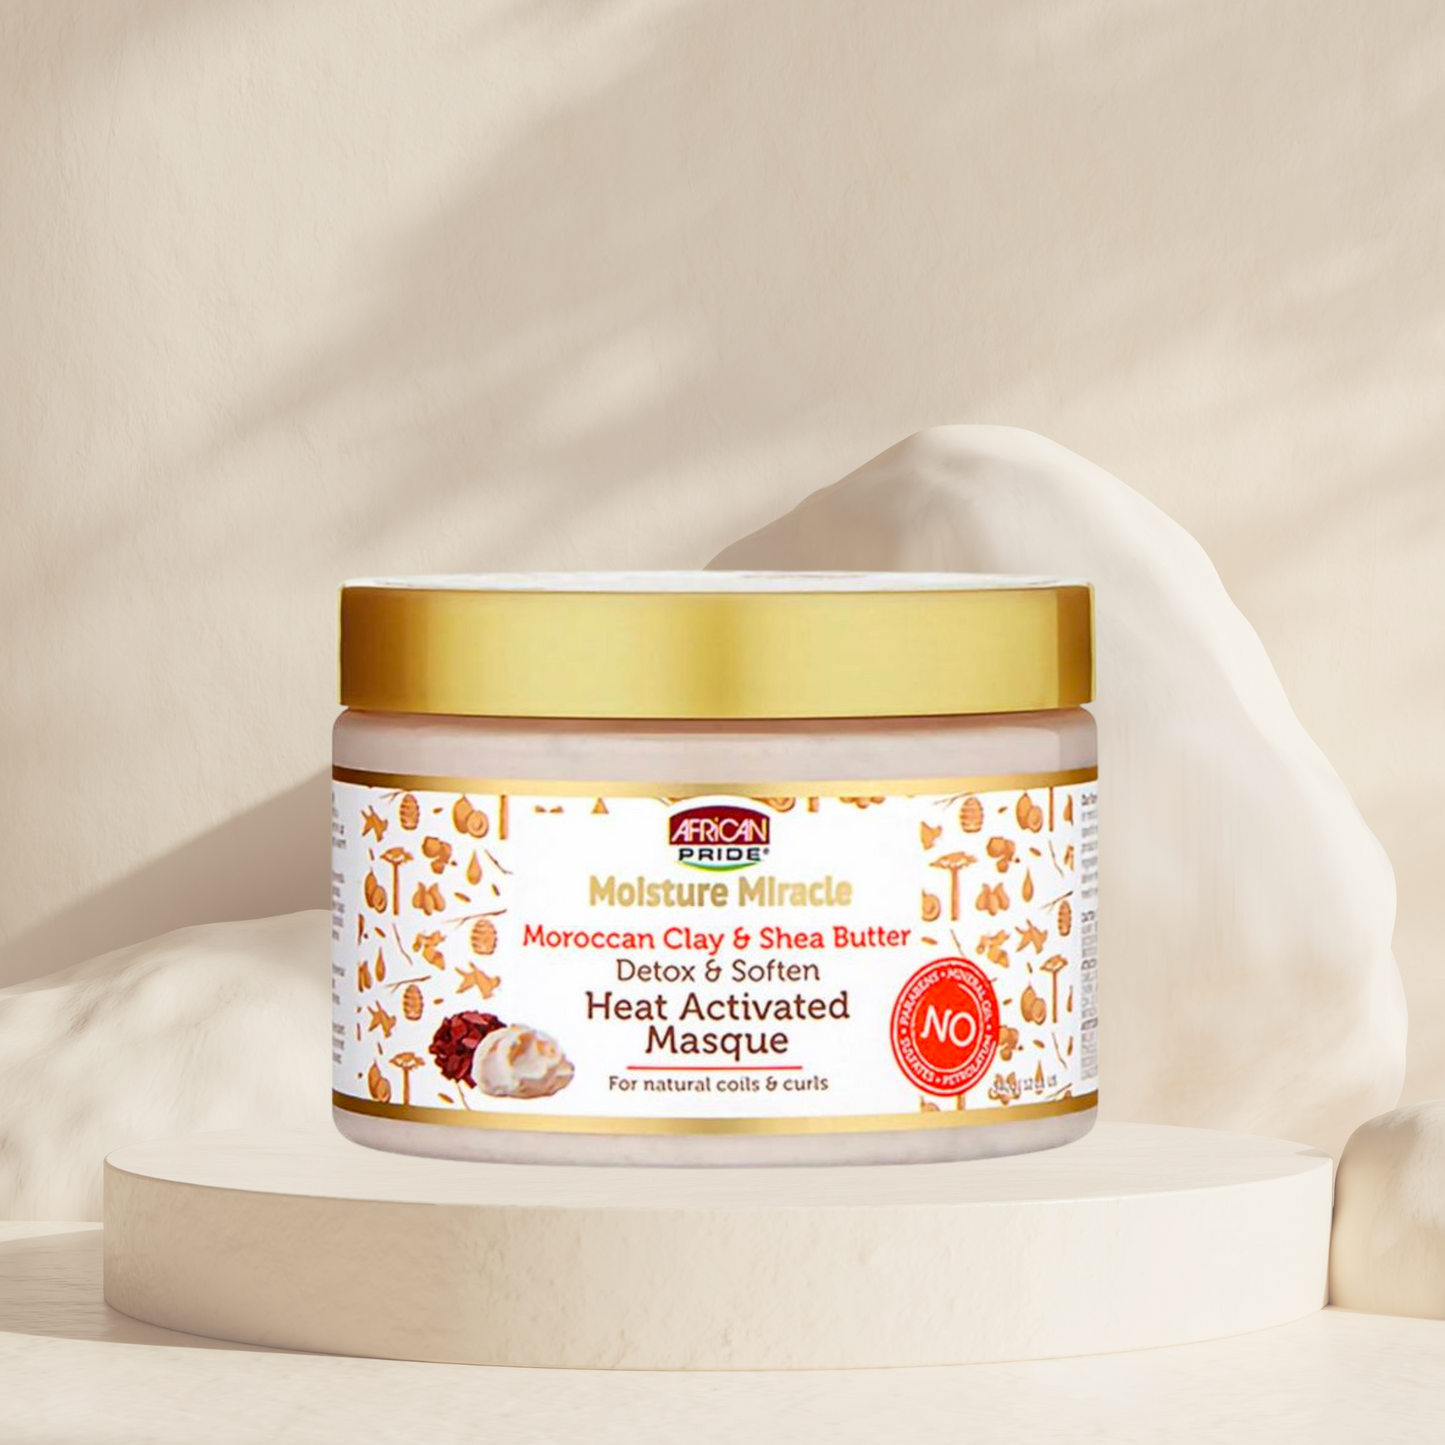 Moisture Miracle Heat Activated Masque - African Pride